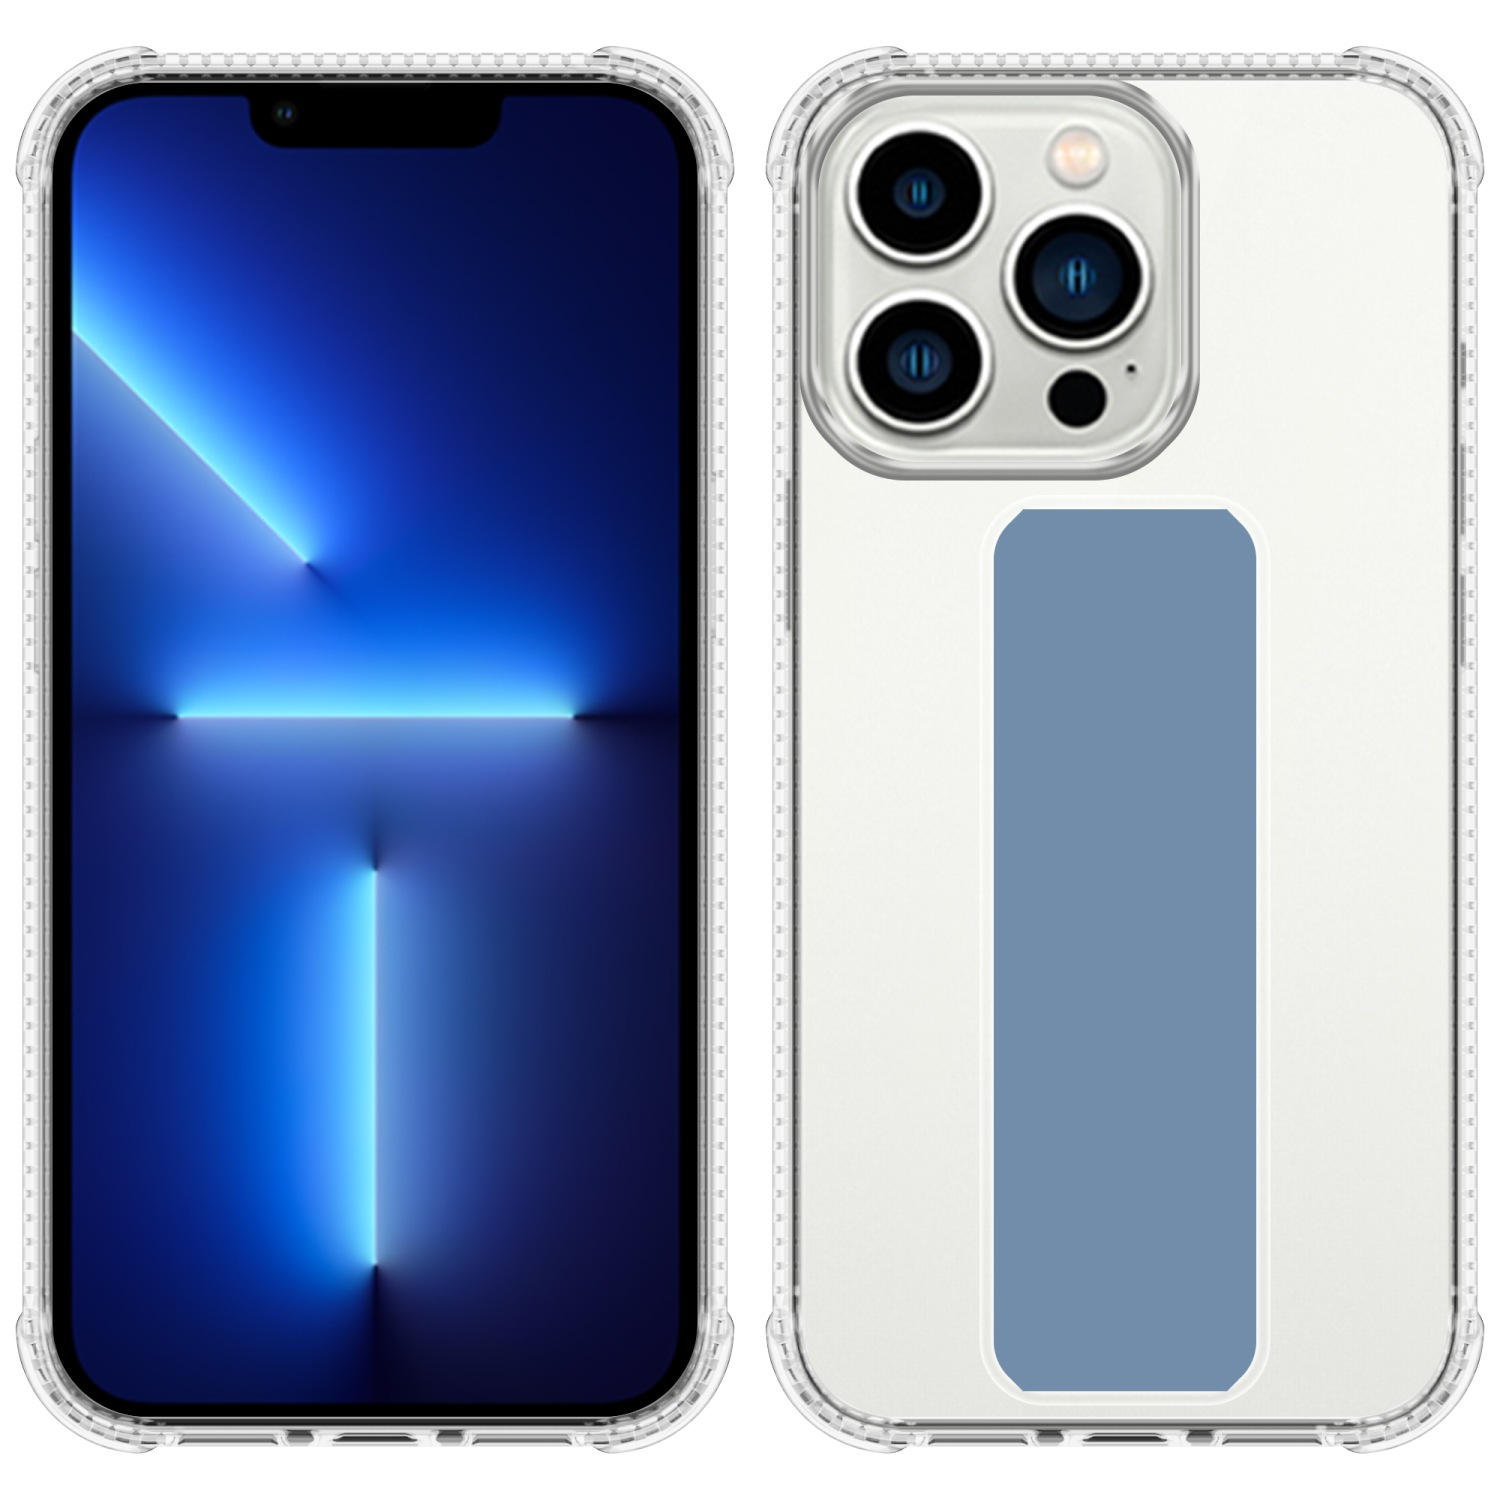 iPhone Standfunktion, BLAU HELL Backcover, Hülle und Apple, MAX, Halterung mit CADORABO 12 PRO